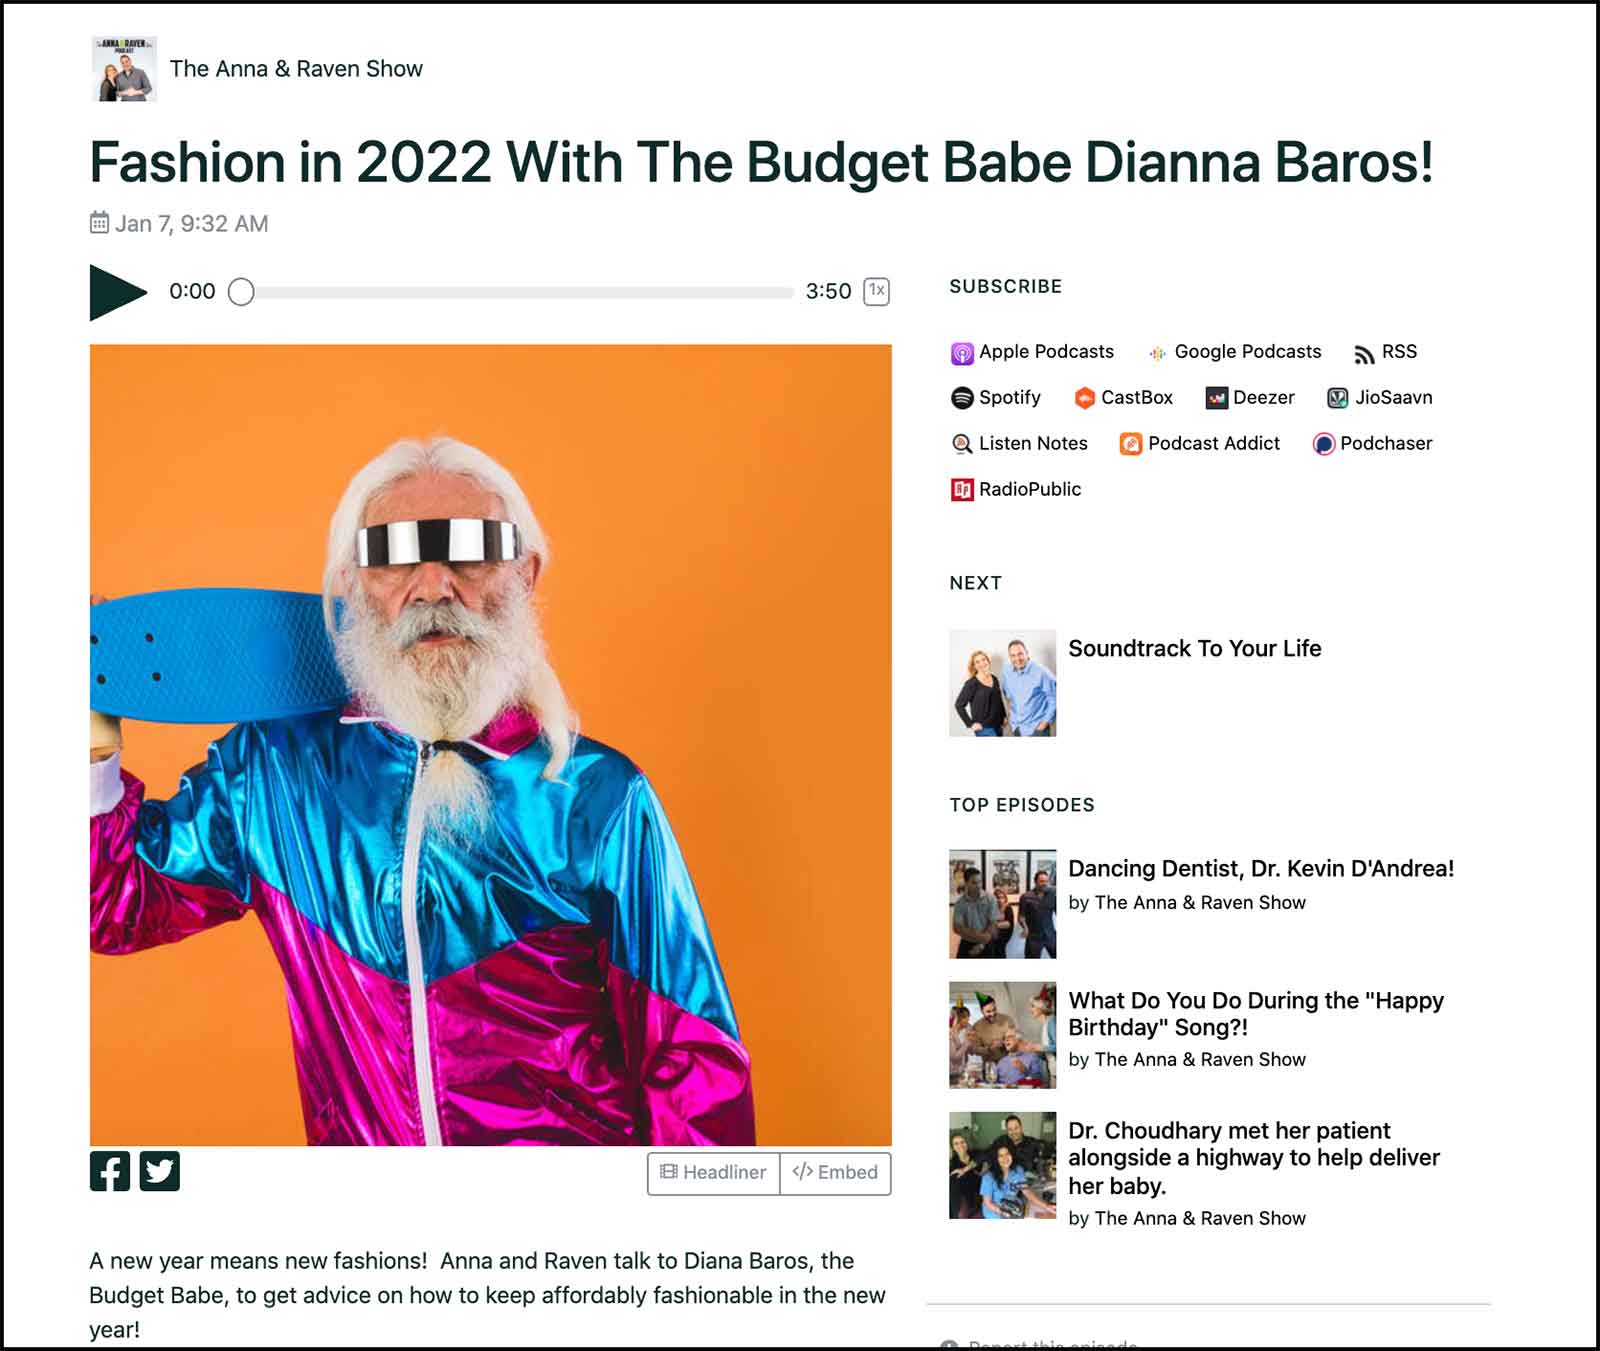 Listen to The Budget Babe talk 2022 fashion trends with Anna & Raven Radio